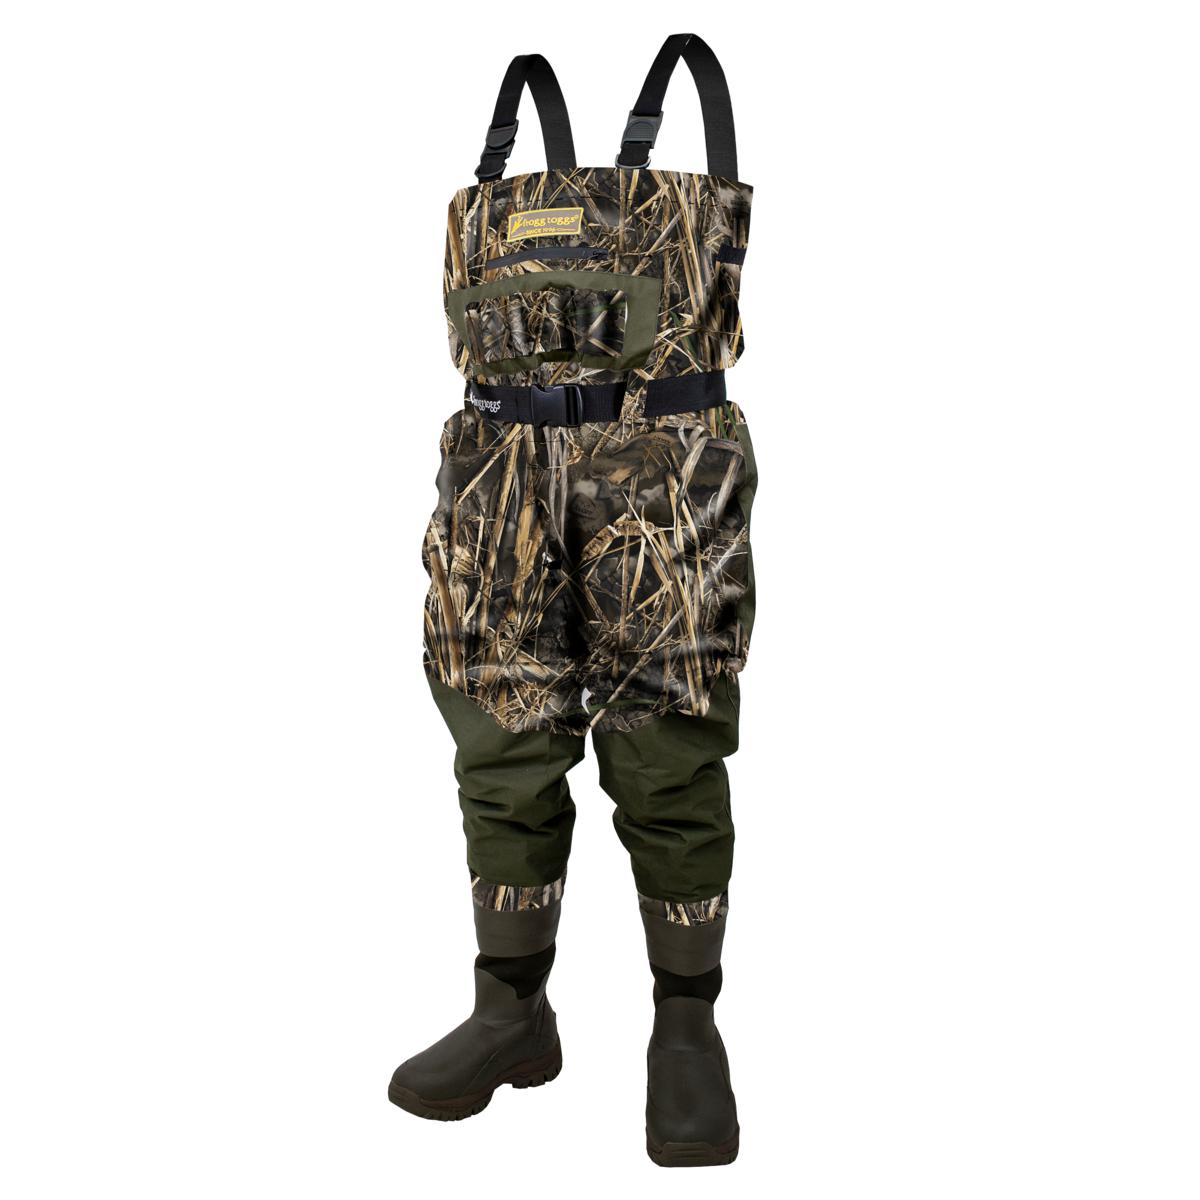 Frogg Toggs Grand Refuge 3.0 Bootfoot Chest Waders-Footwear-REALTREE MAX-7-7-Kevin's Fine Outdoor Gear & Apparel